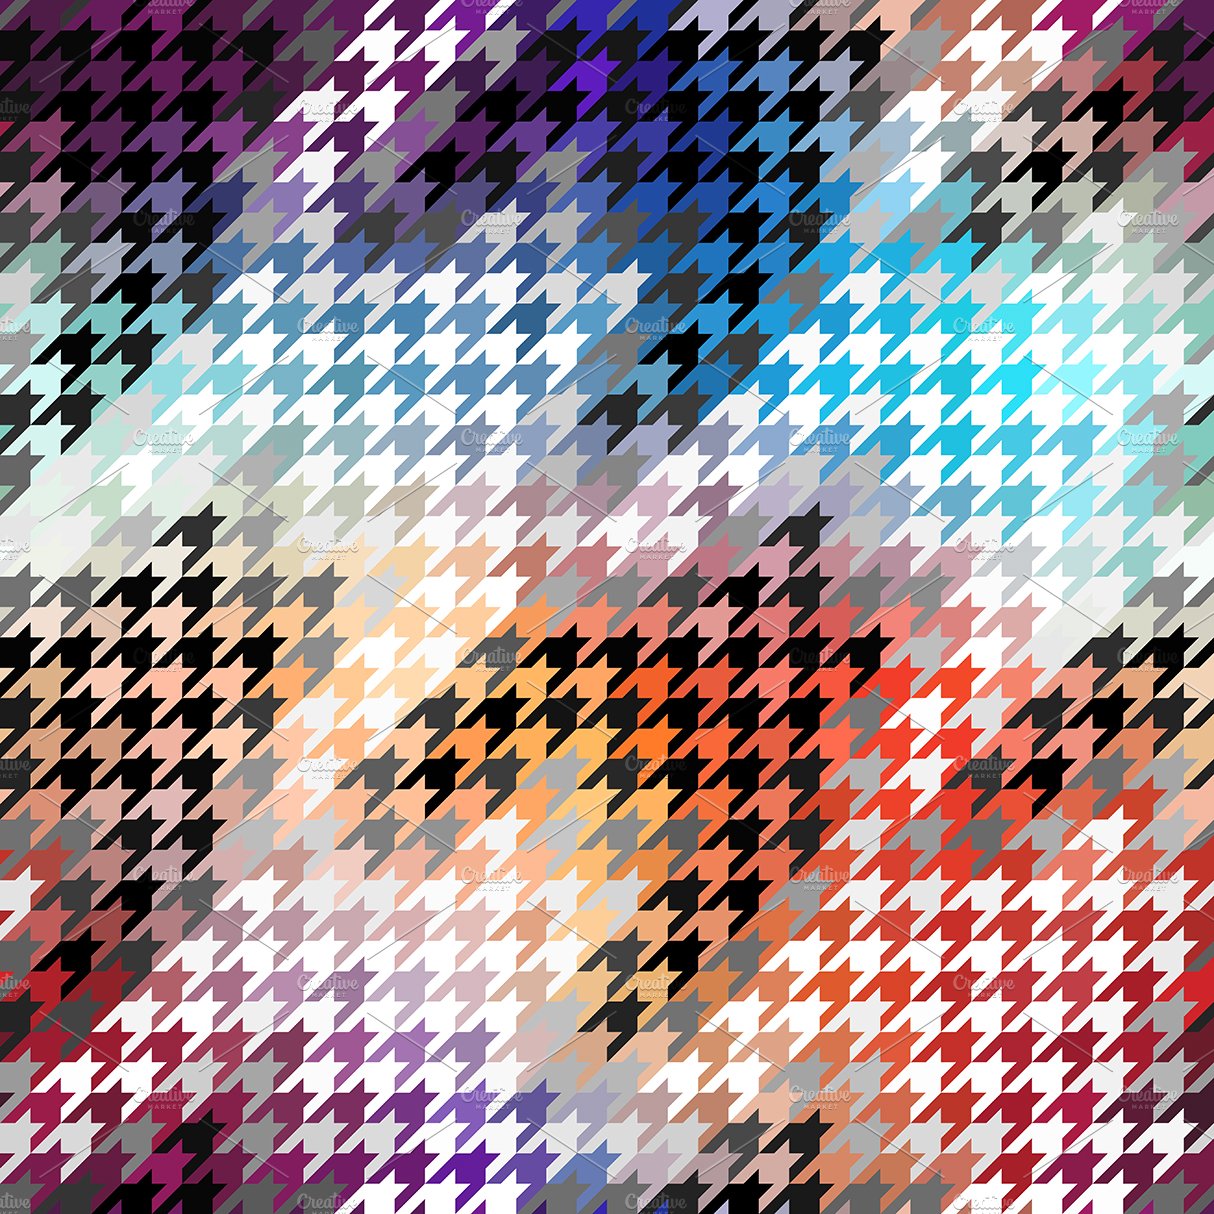 10 houndstooth patterns preview image.